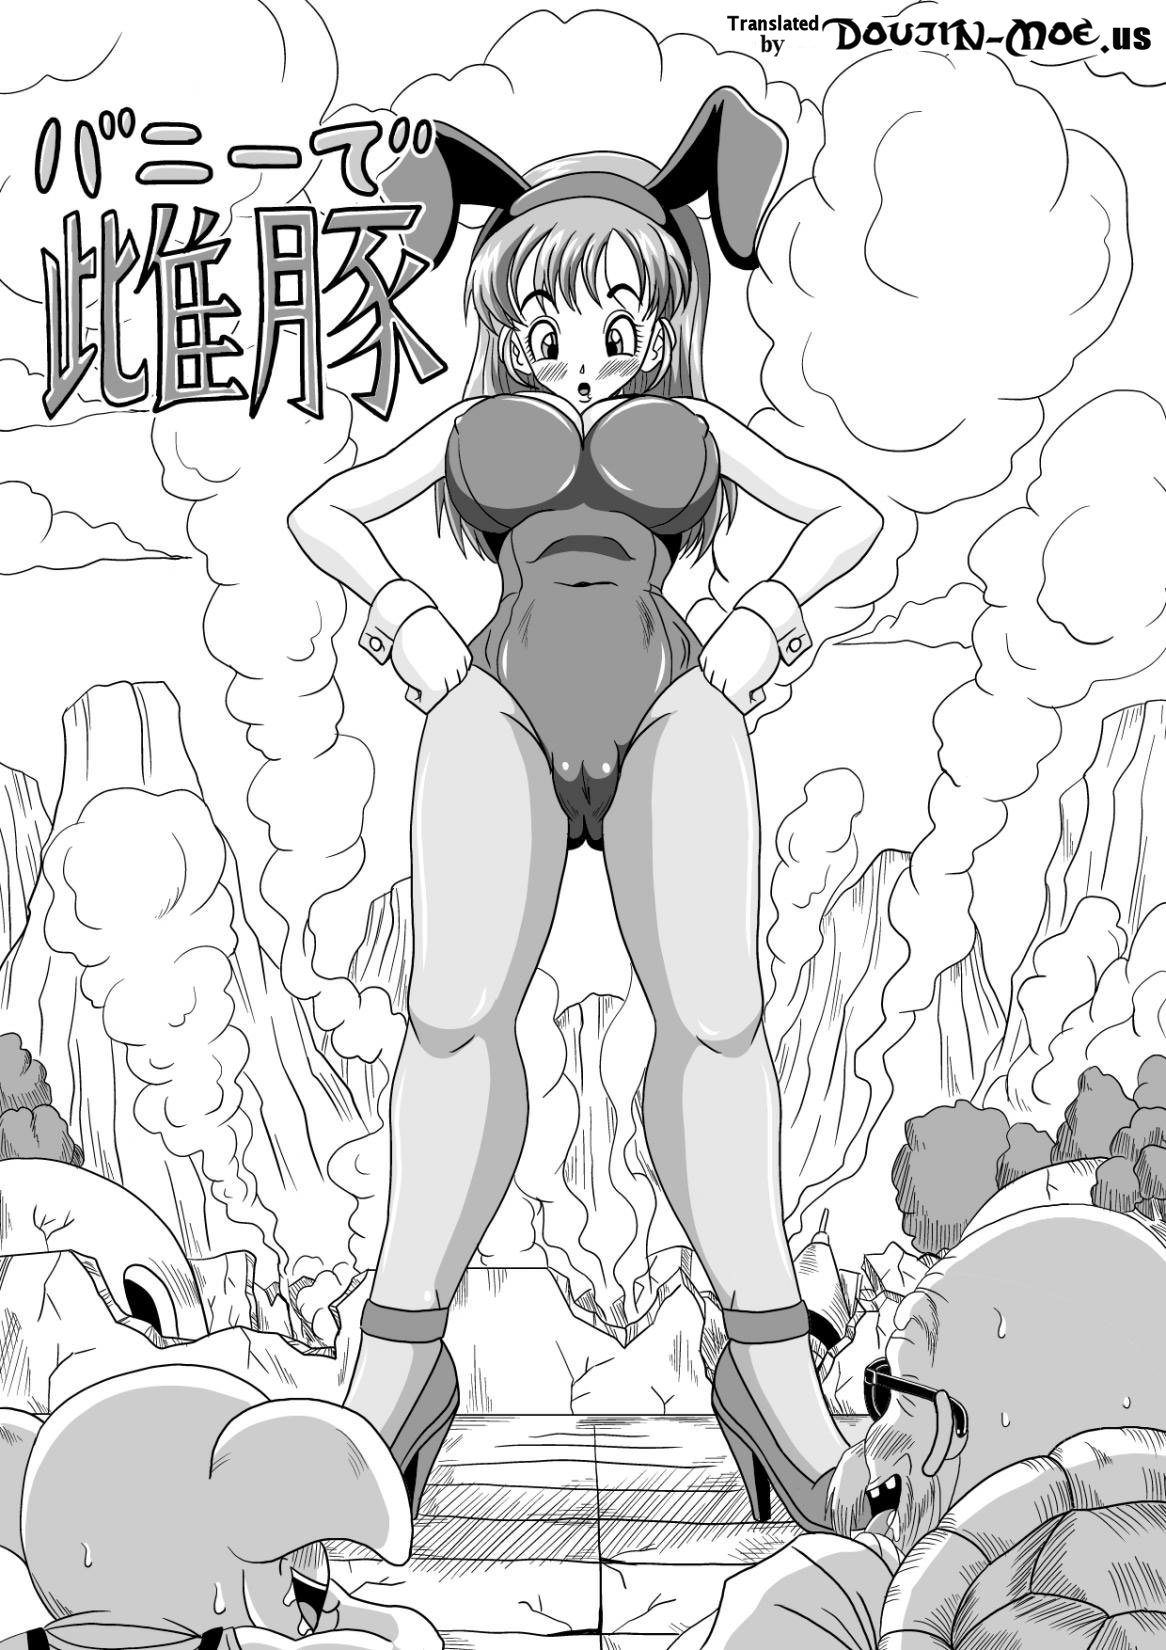 [Pyramid House] Sow in the Bunny (Dragon Ball) [English] {doujin-moe} page 5 full